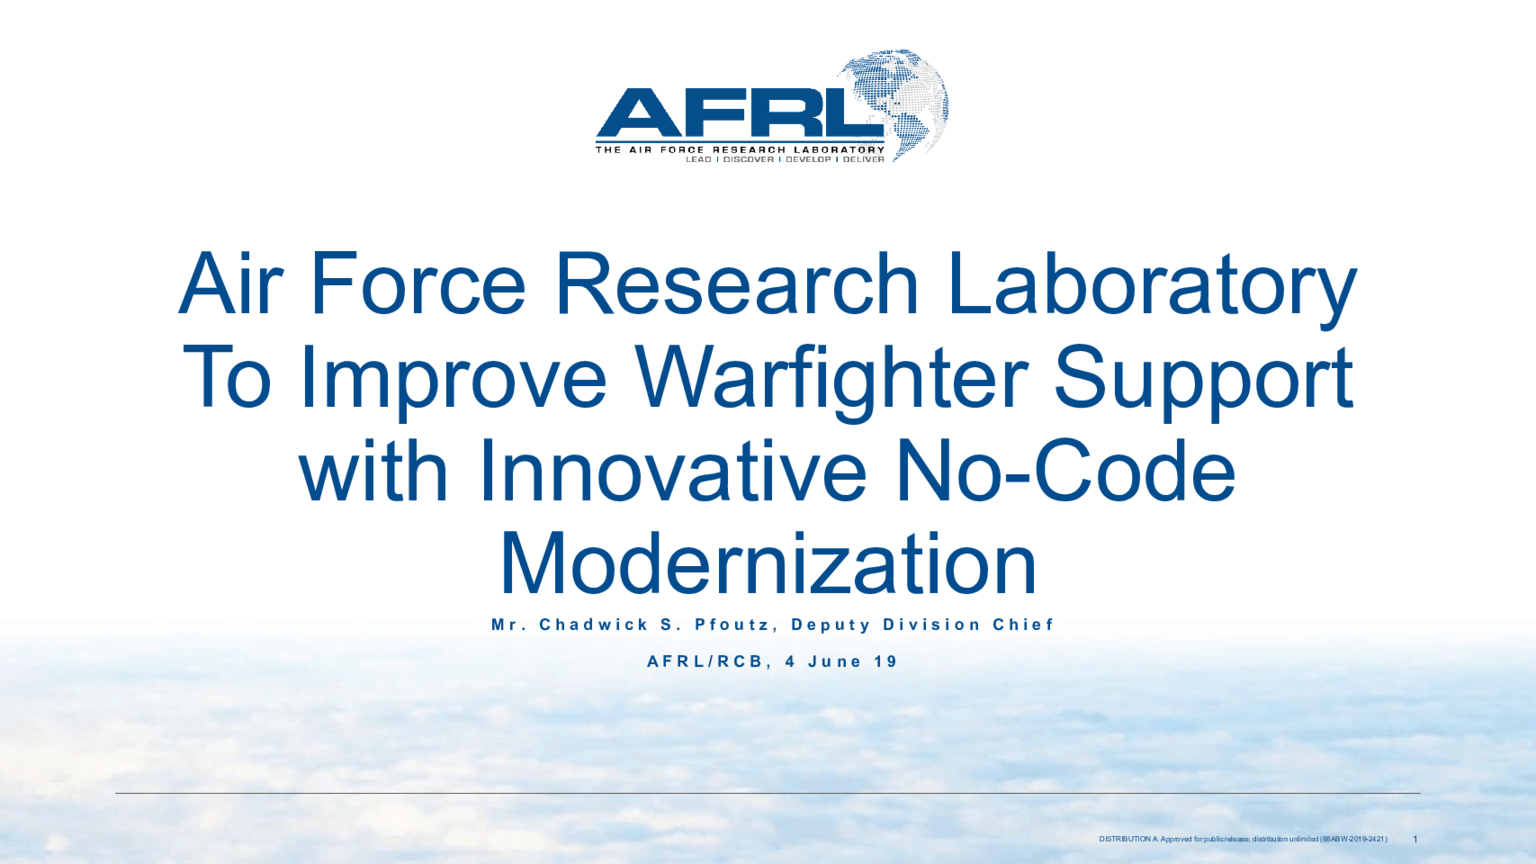 PegaWorld 2019: Air Force Research Laboratory To Improve Warfighter Support with Innovative No-Code Modernization (Presentation)